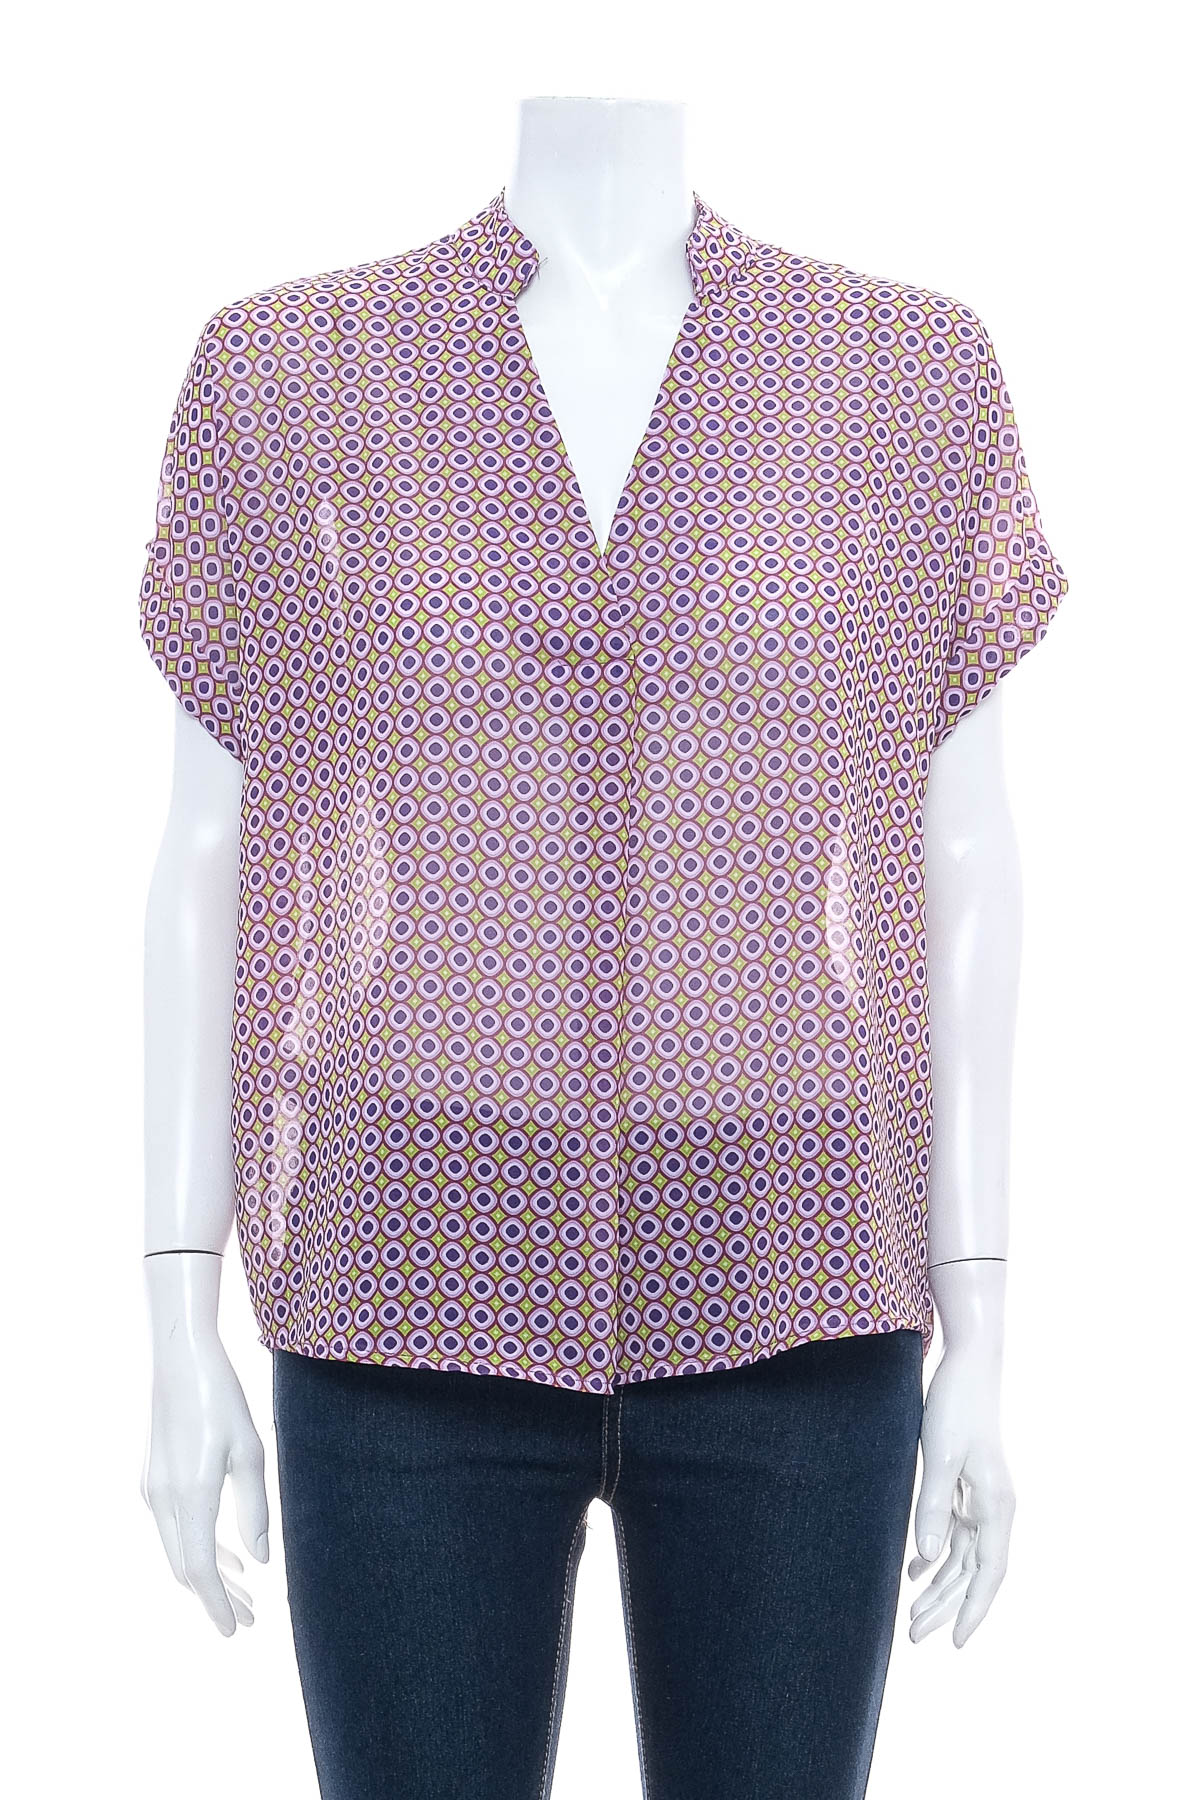 Women's shirt - New Collection - 0